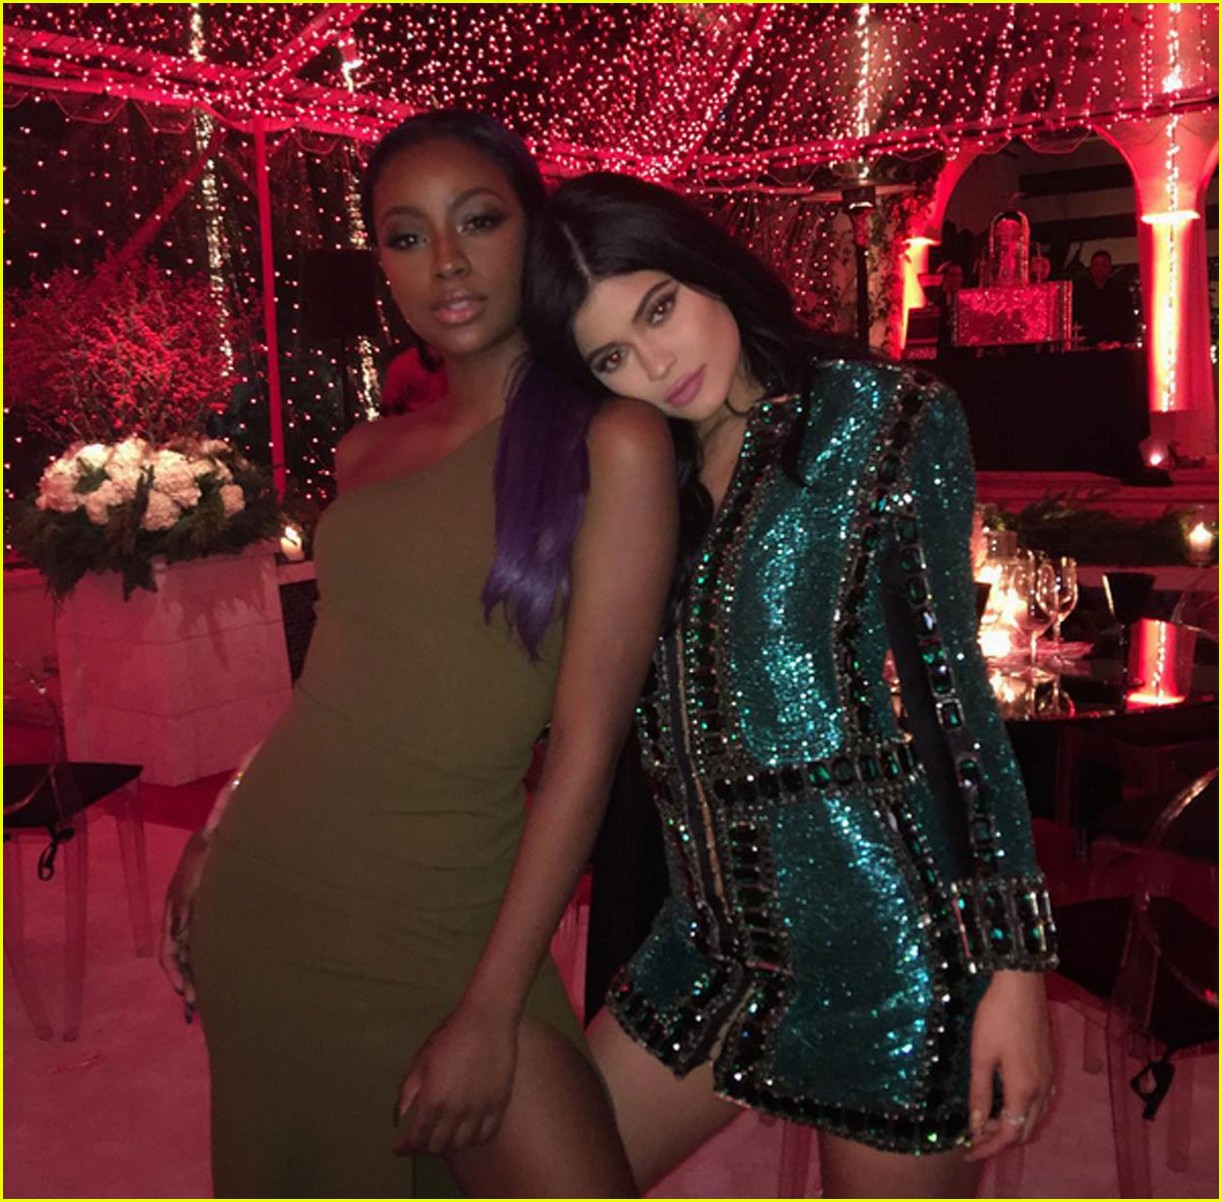 kylie jenner at 2015 kris christmas party 12